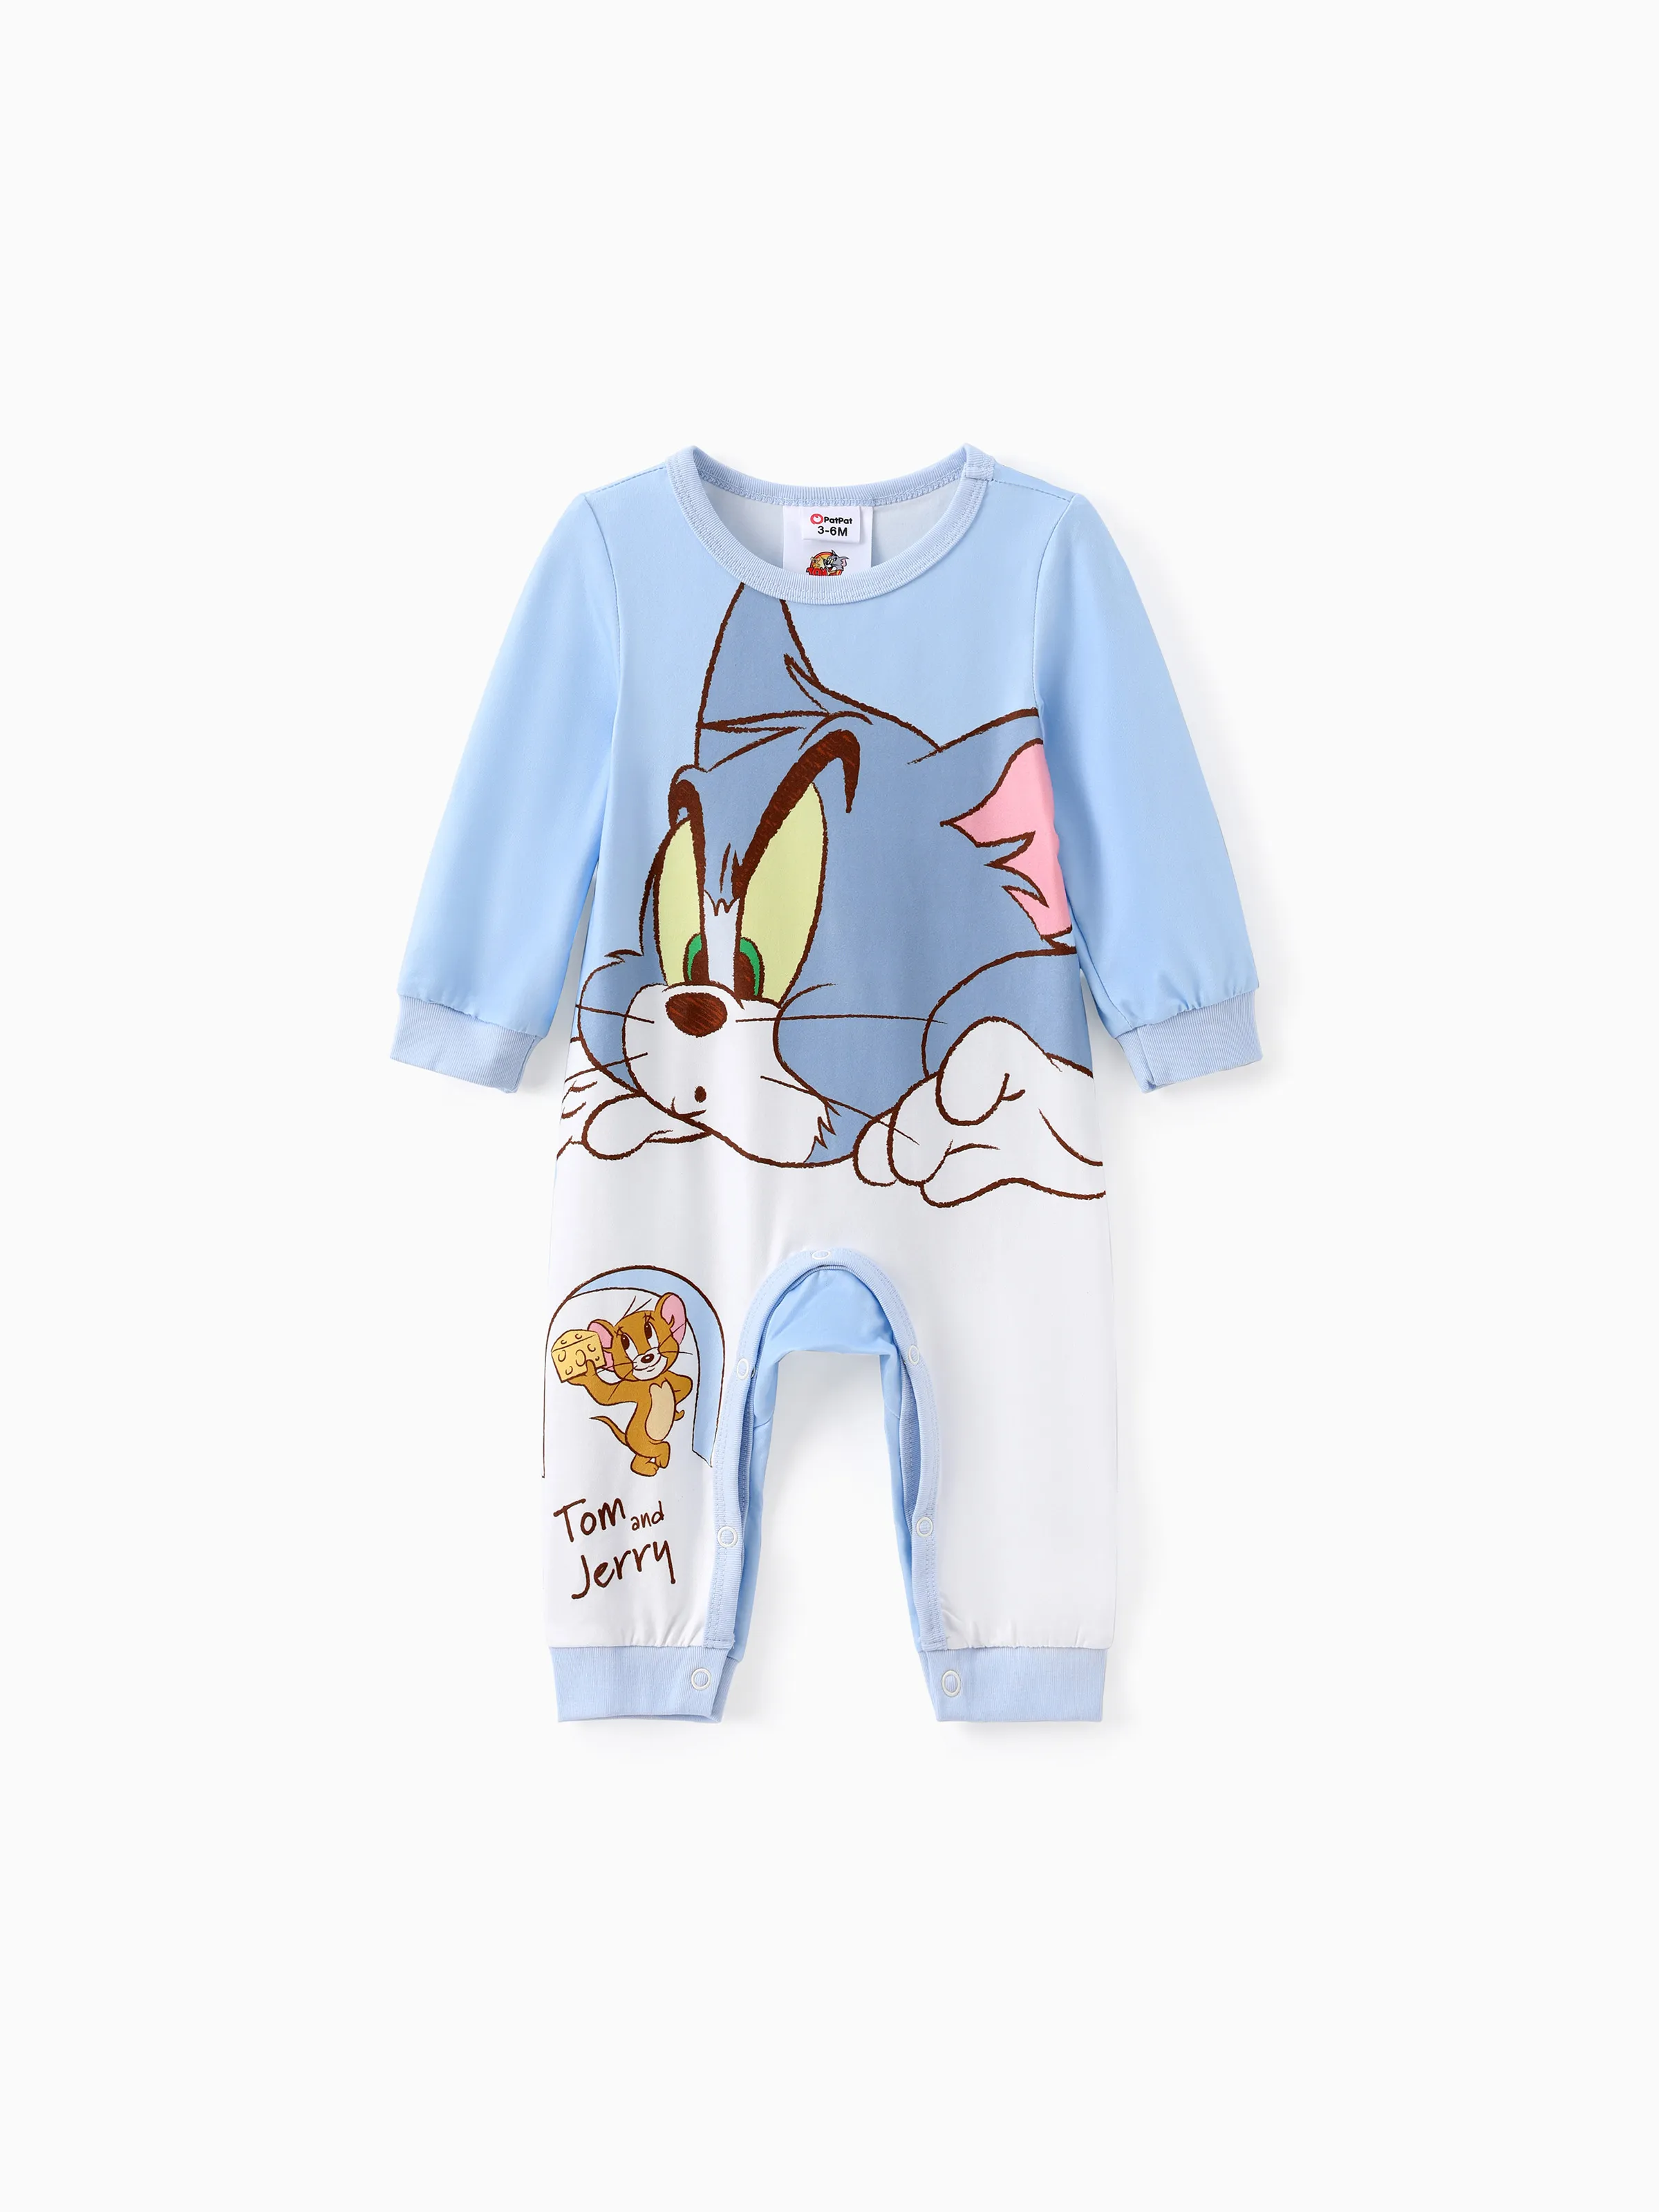 

Tom and Jerry Baby Boy/Girl Cute Pattern Print Jumpsuit